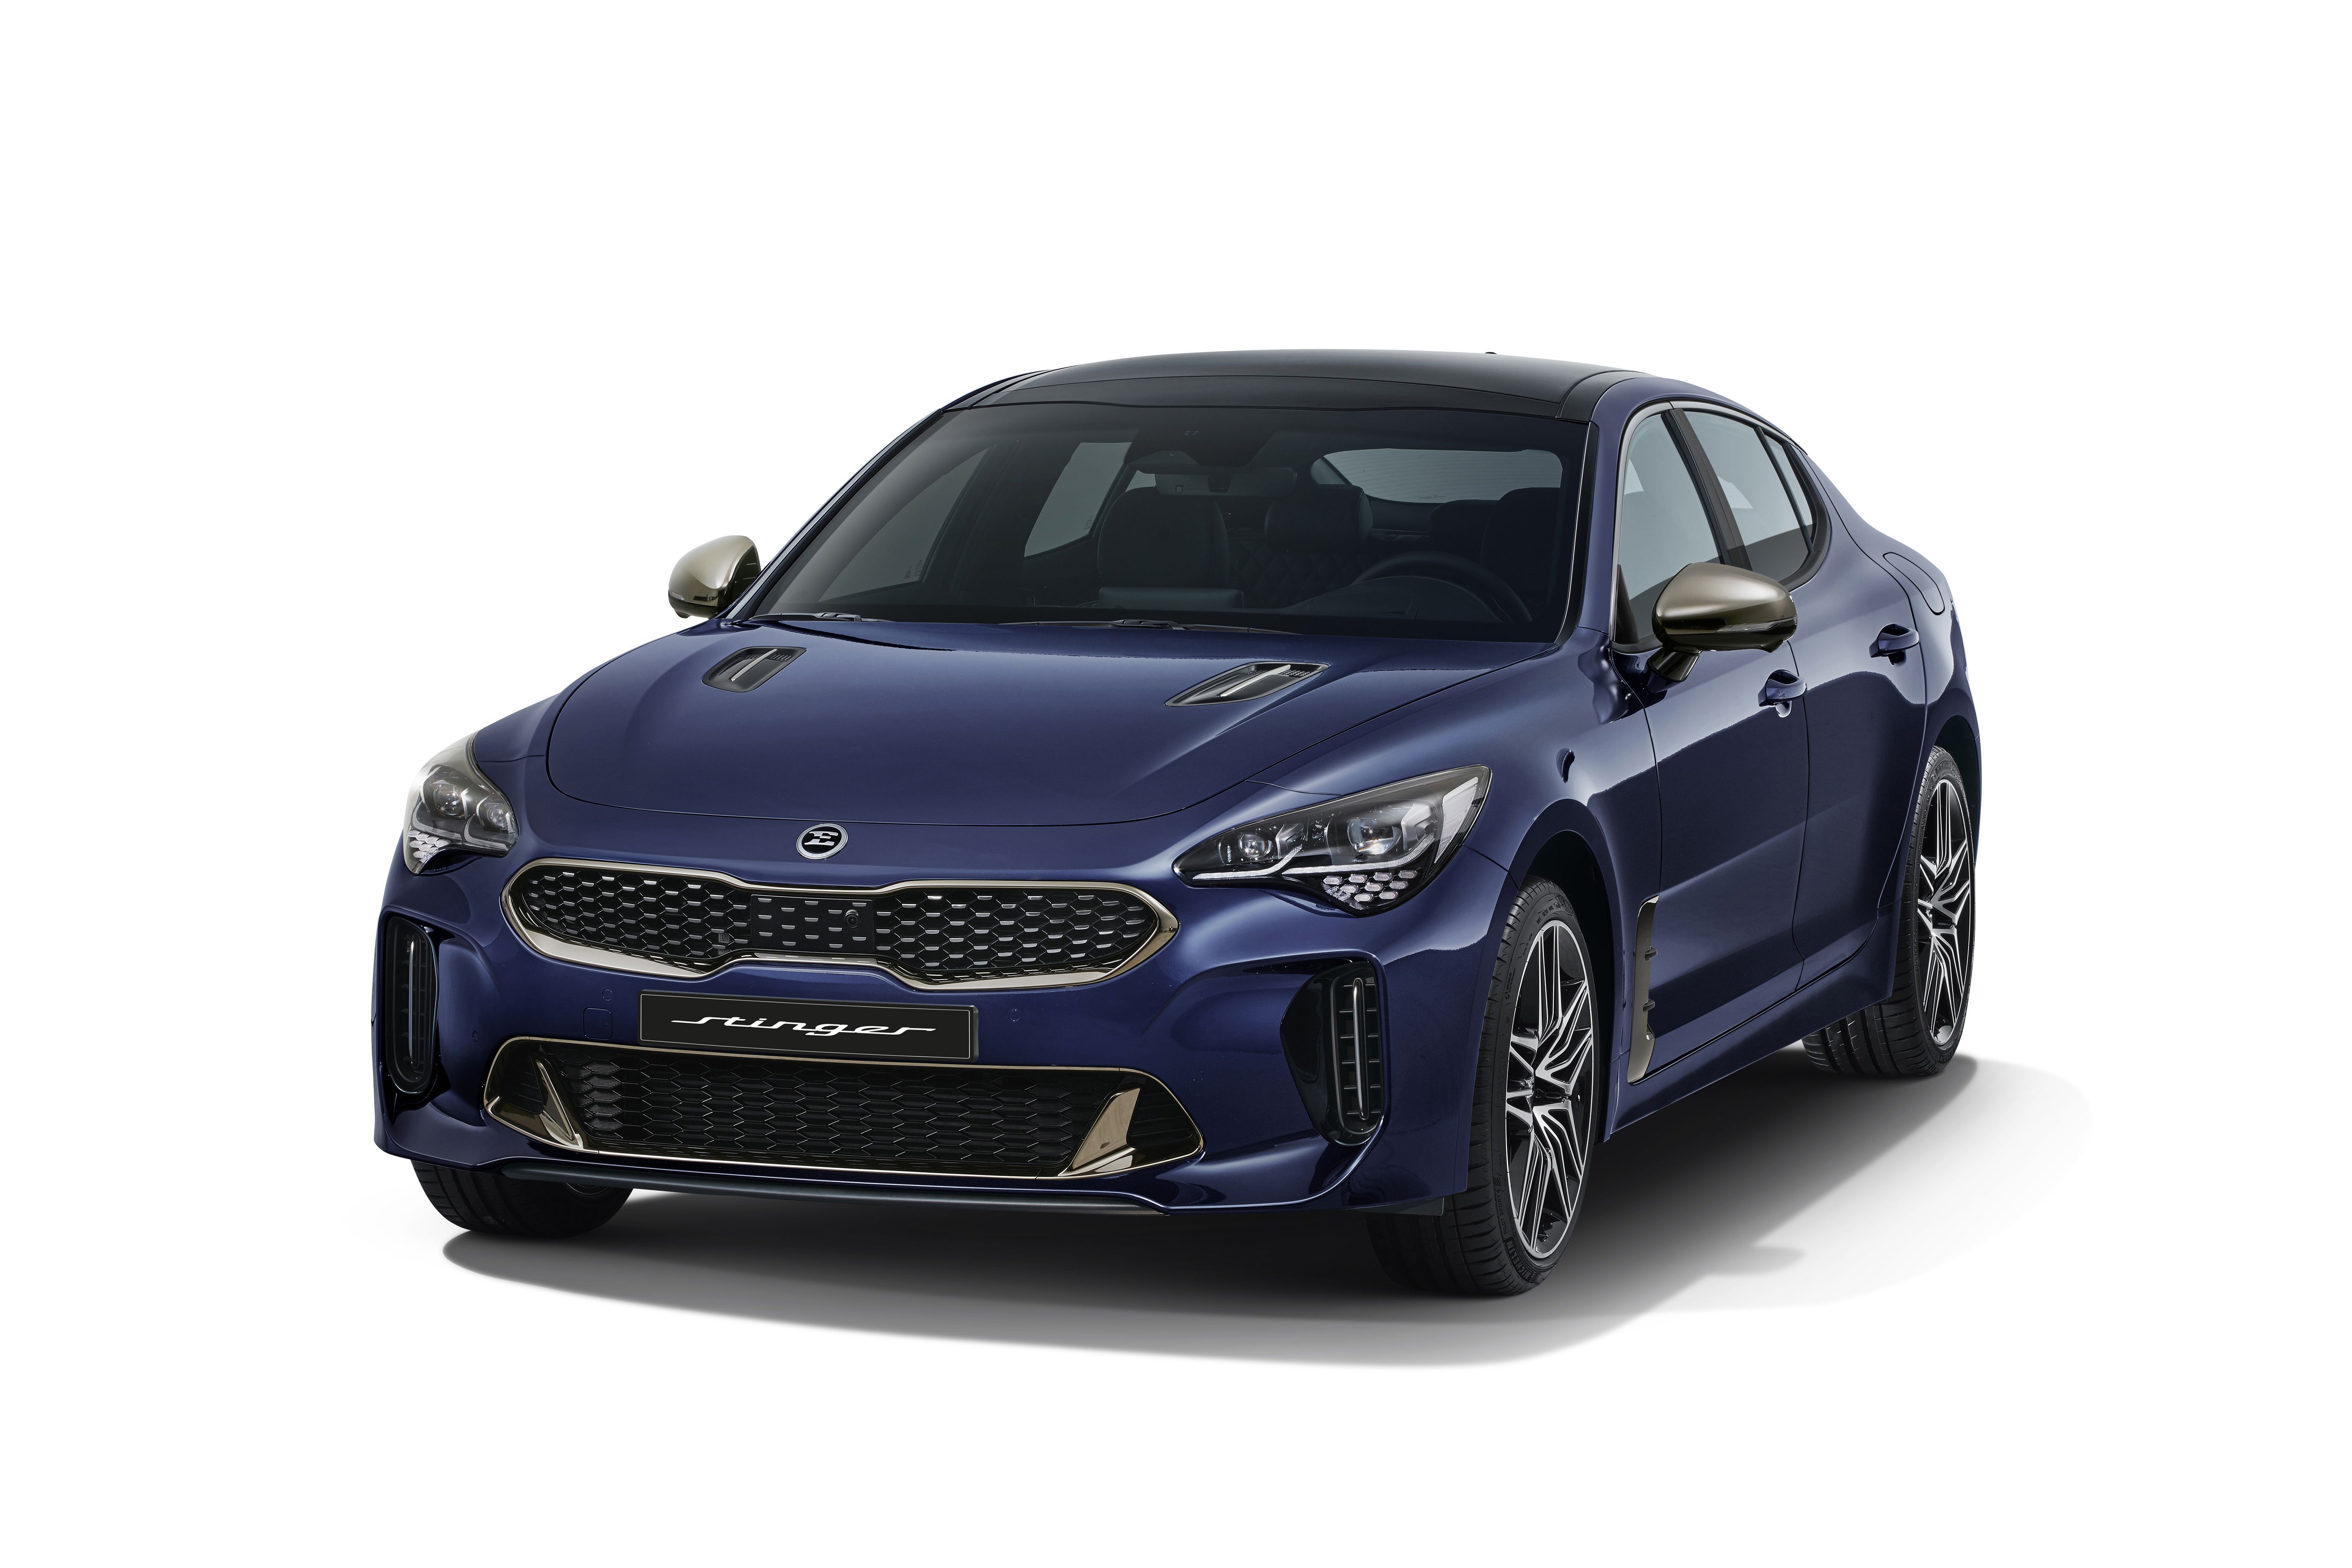 2021 Kia Stinger Review, Pricing, and Specs